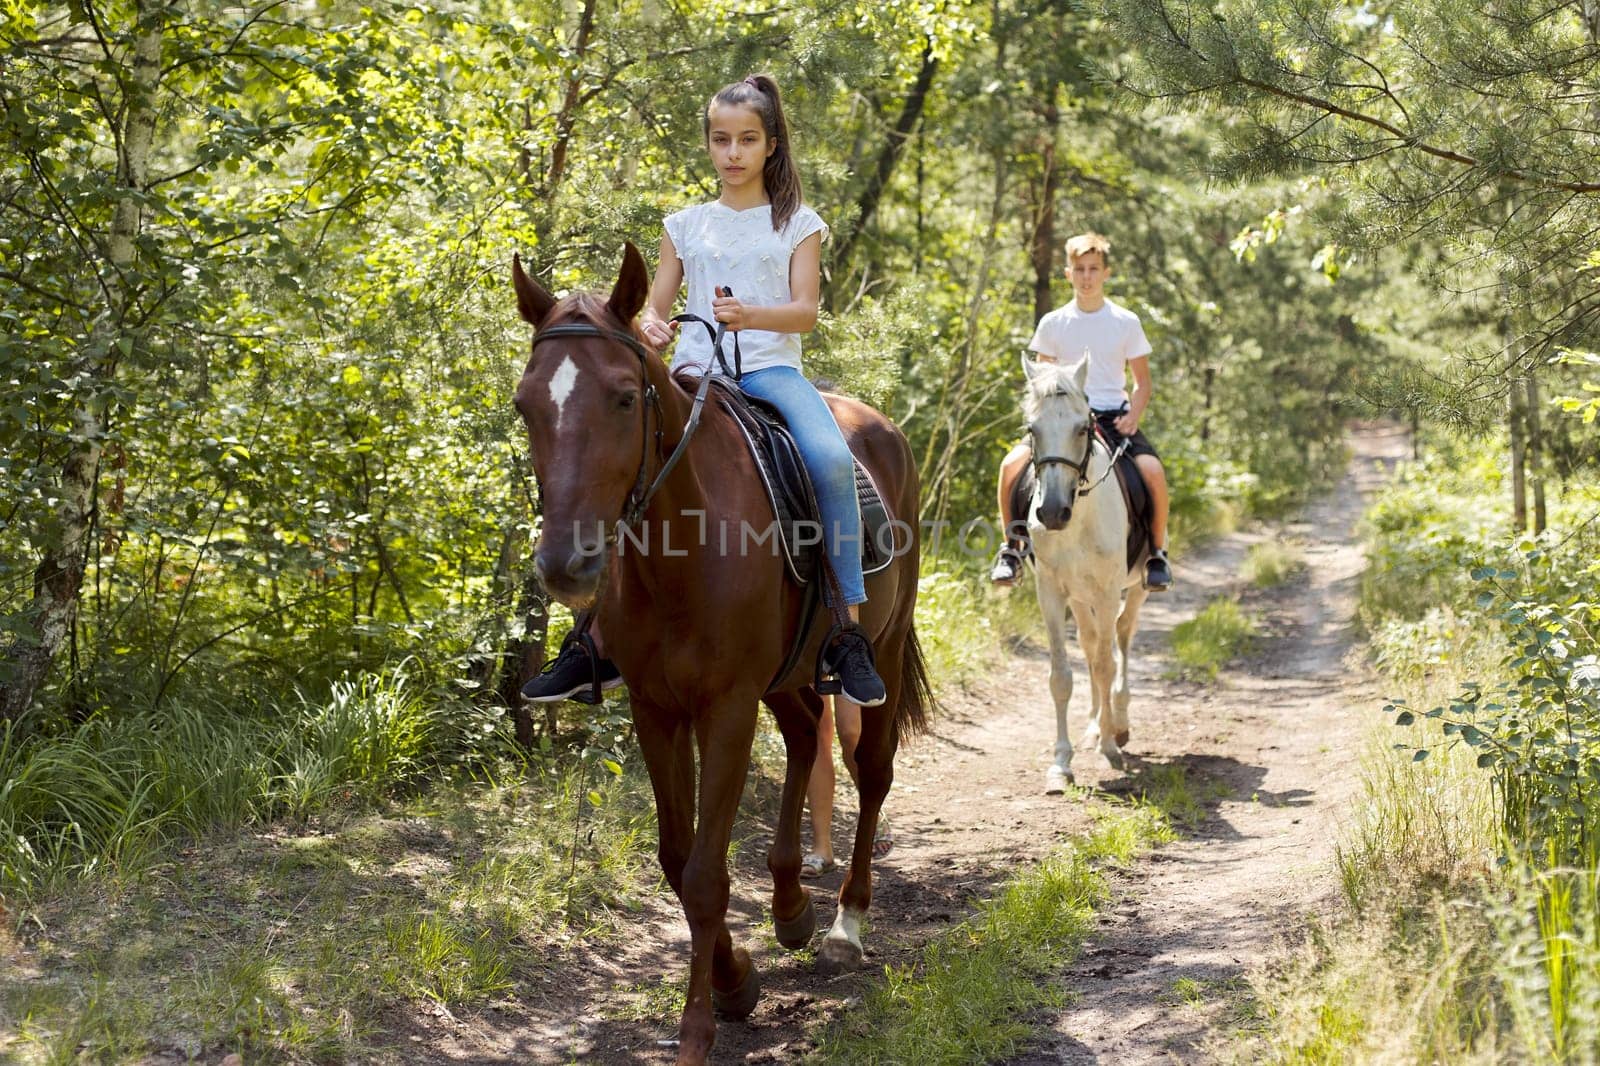 Group of teenagers on horseback riding in summer park.